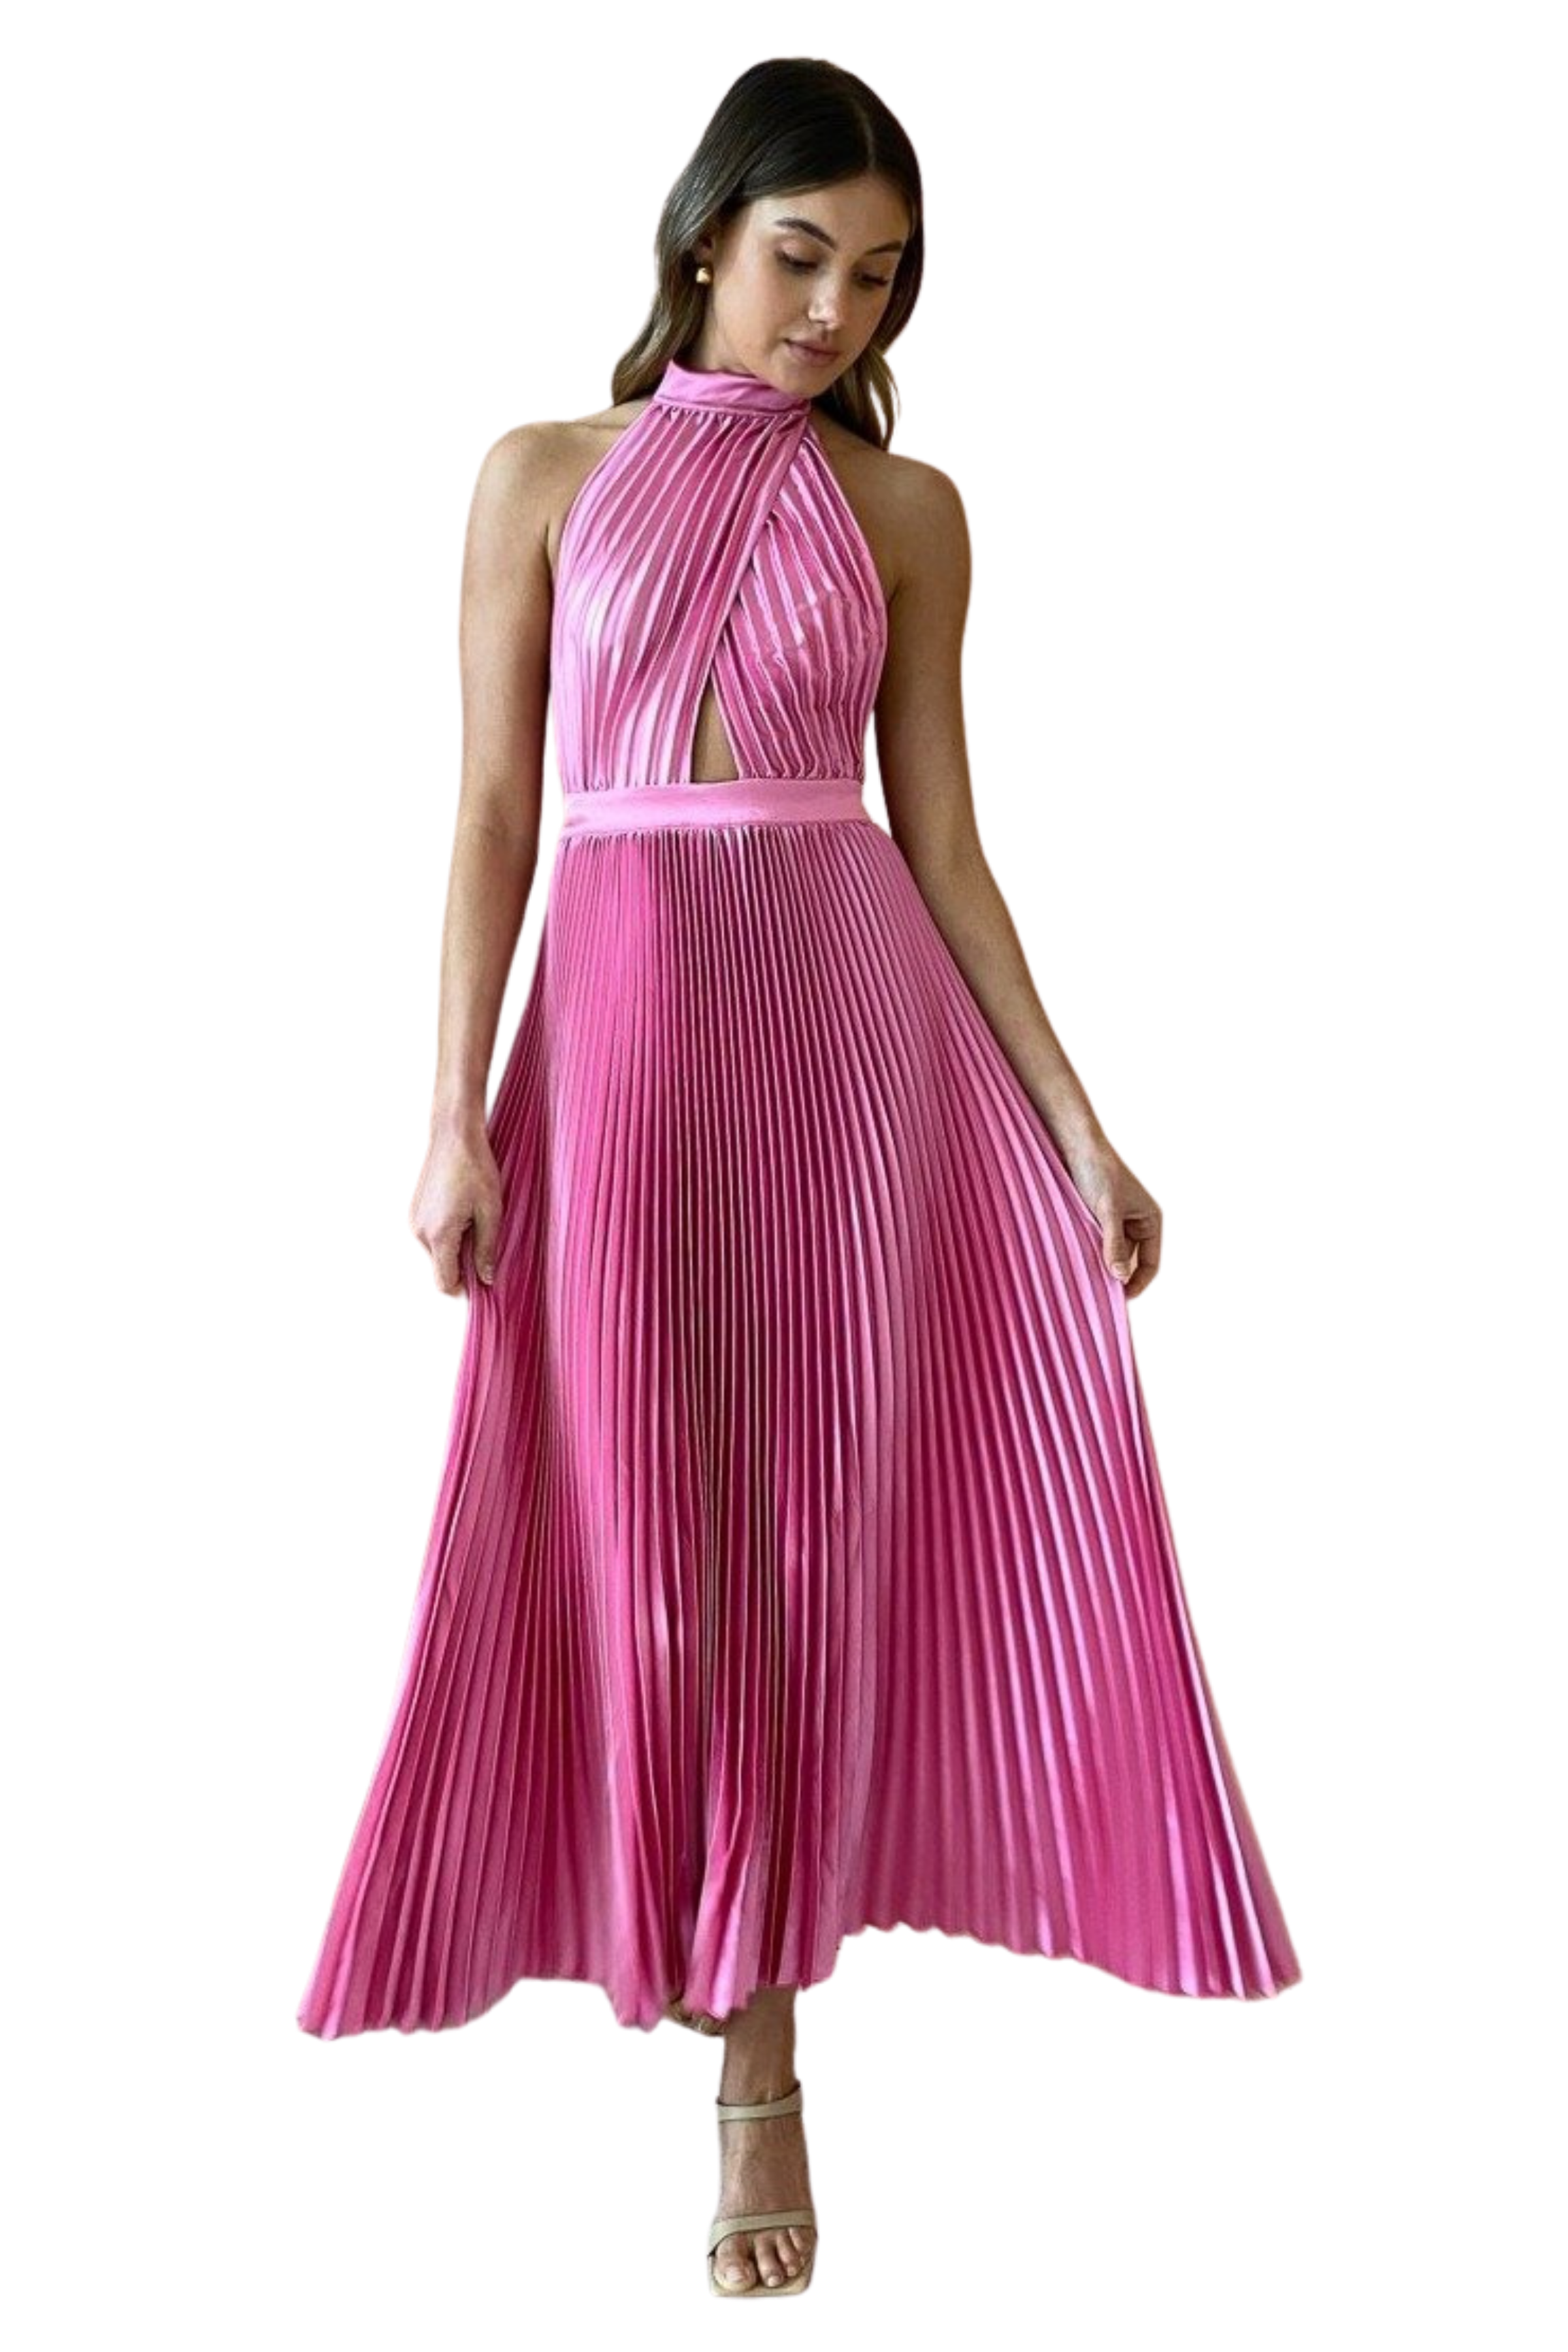 L'Idee L'IDEE Renaissance Gown (Hot Pink) - RRP $359 - lidee-renaissance-gown-hot-pink---rrp-9-dress-for-a-night-30754791.png